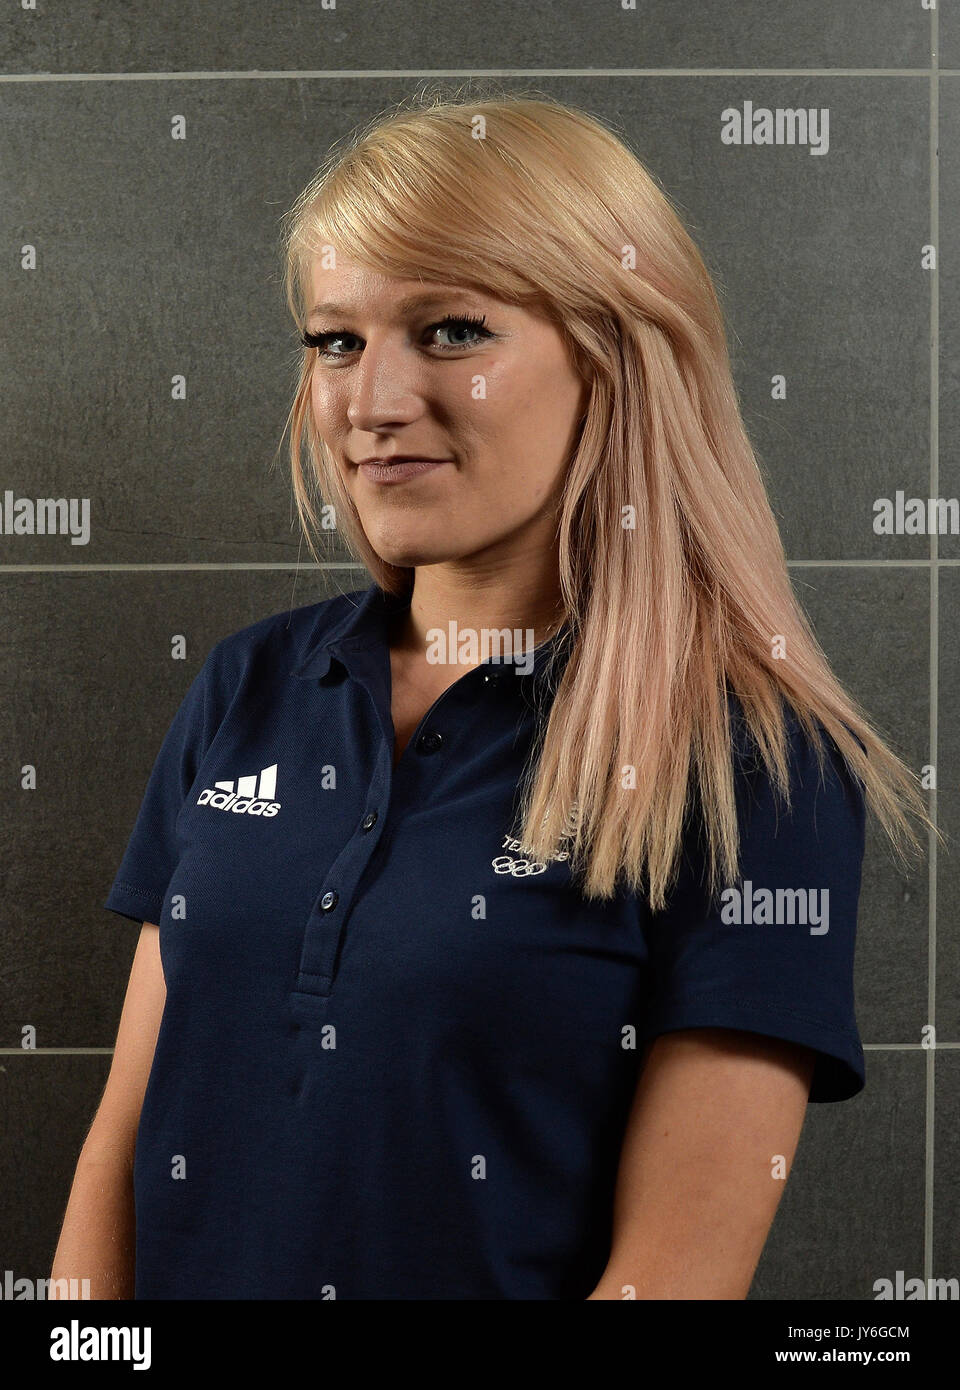 Elise Christie during the PyeongChang 2018 Olympic Winter Games photocall at Heriot Watt University, Oriam. PRESS ASSOCIATION Photo. Picture date: Friday August 18, 2017. Photo credit should read: Mark Runnacles/PA Wire Stock Photo